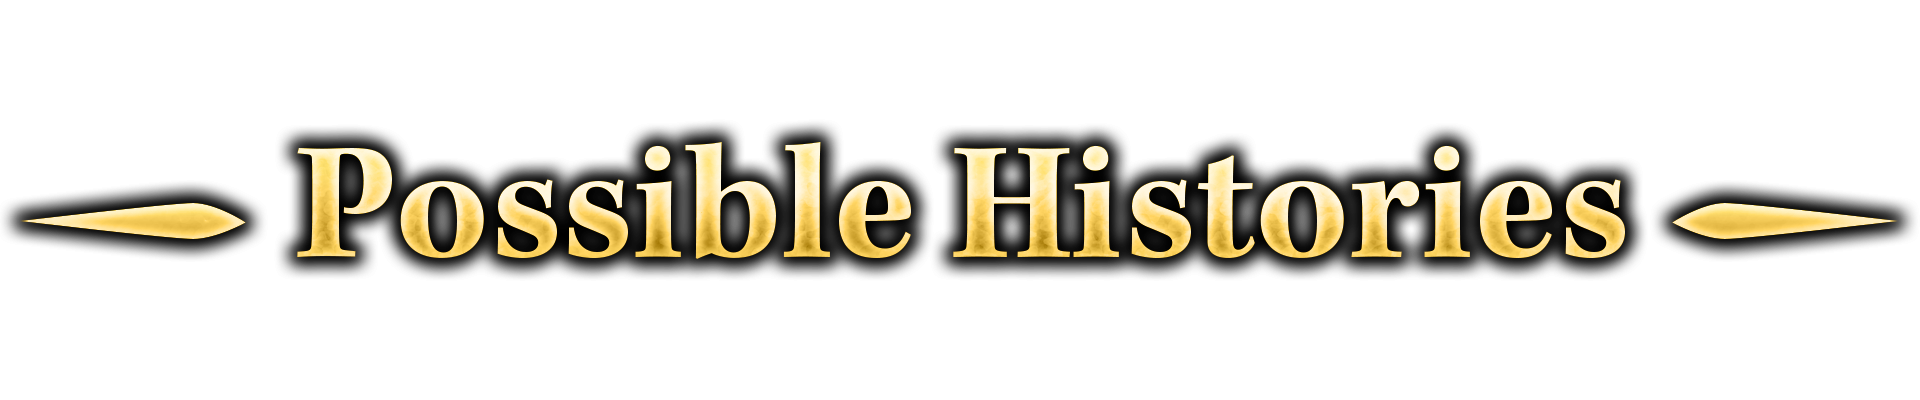 Possible Histories Title